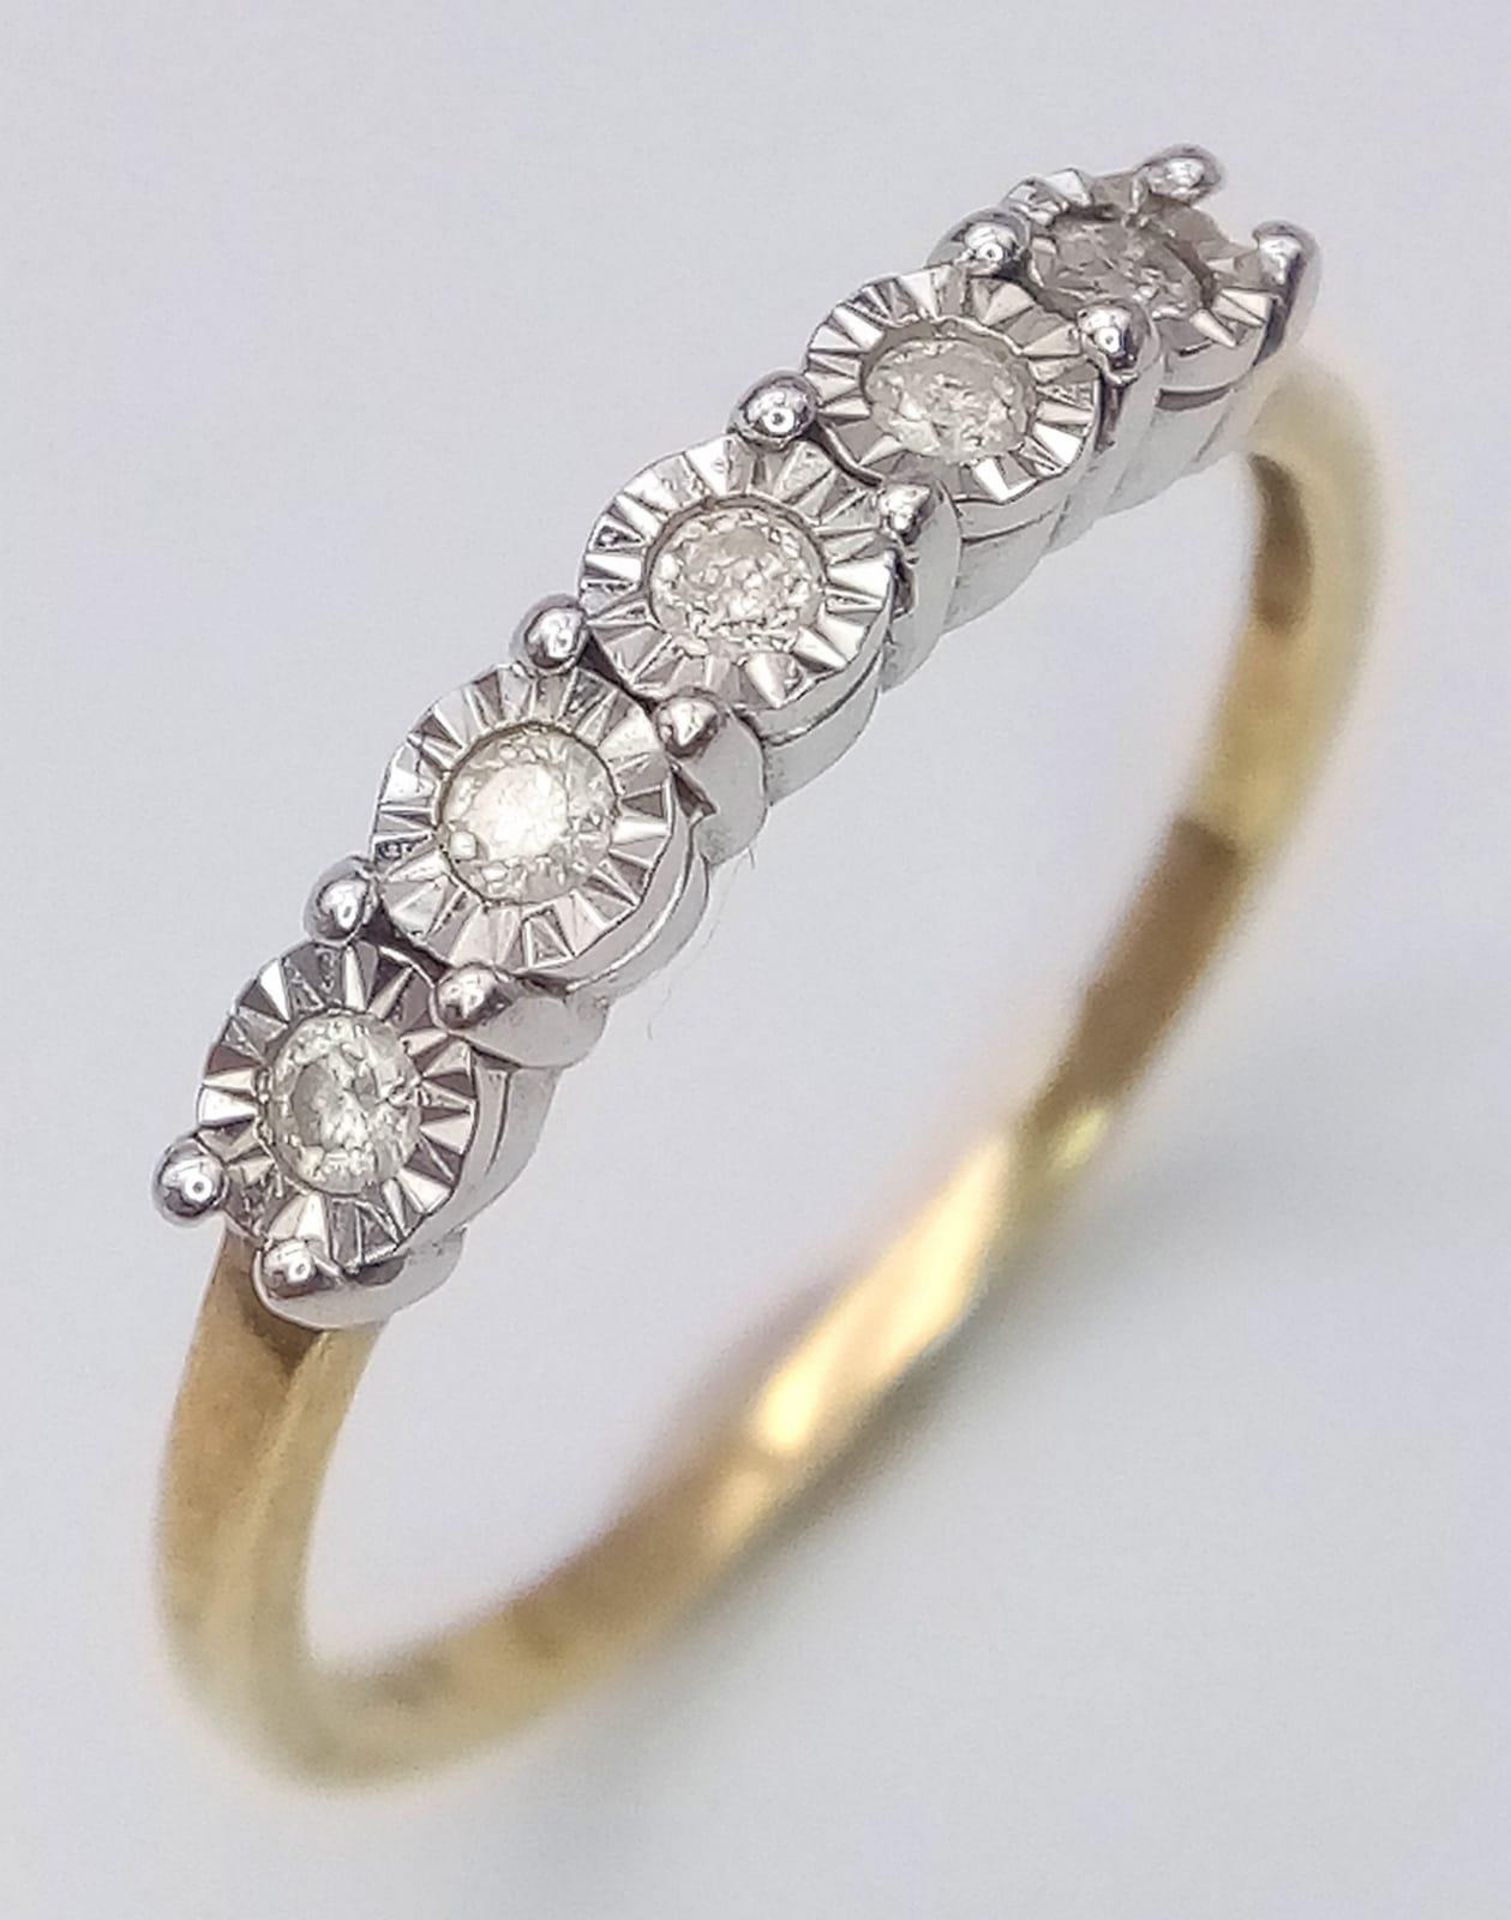 A 9K YELLOW GOLD DIAMOND 5 STONES RING. TOTAL WEIGHT 1.9G. SIZE R